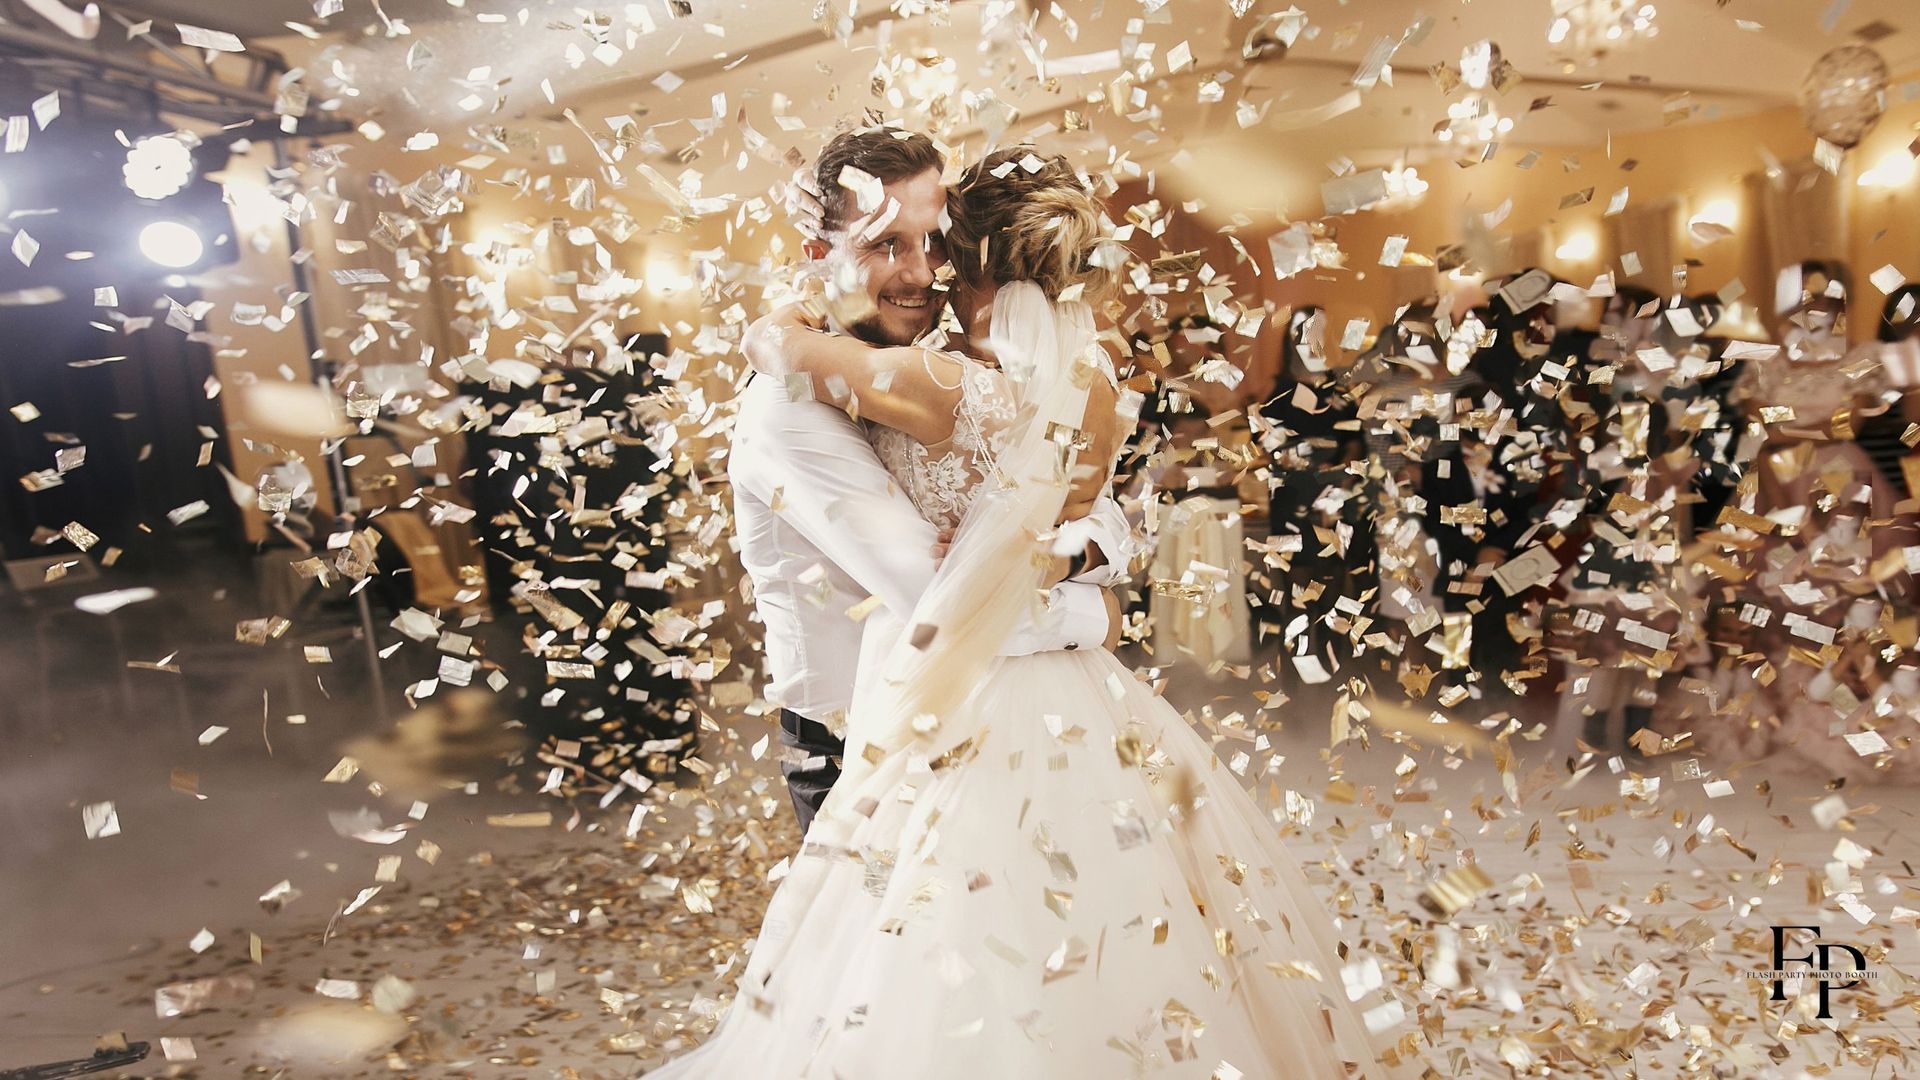 The bride and groom showered in confetti while embracing each other after the wedding celebration